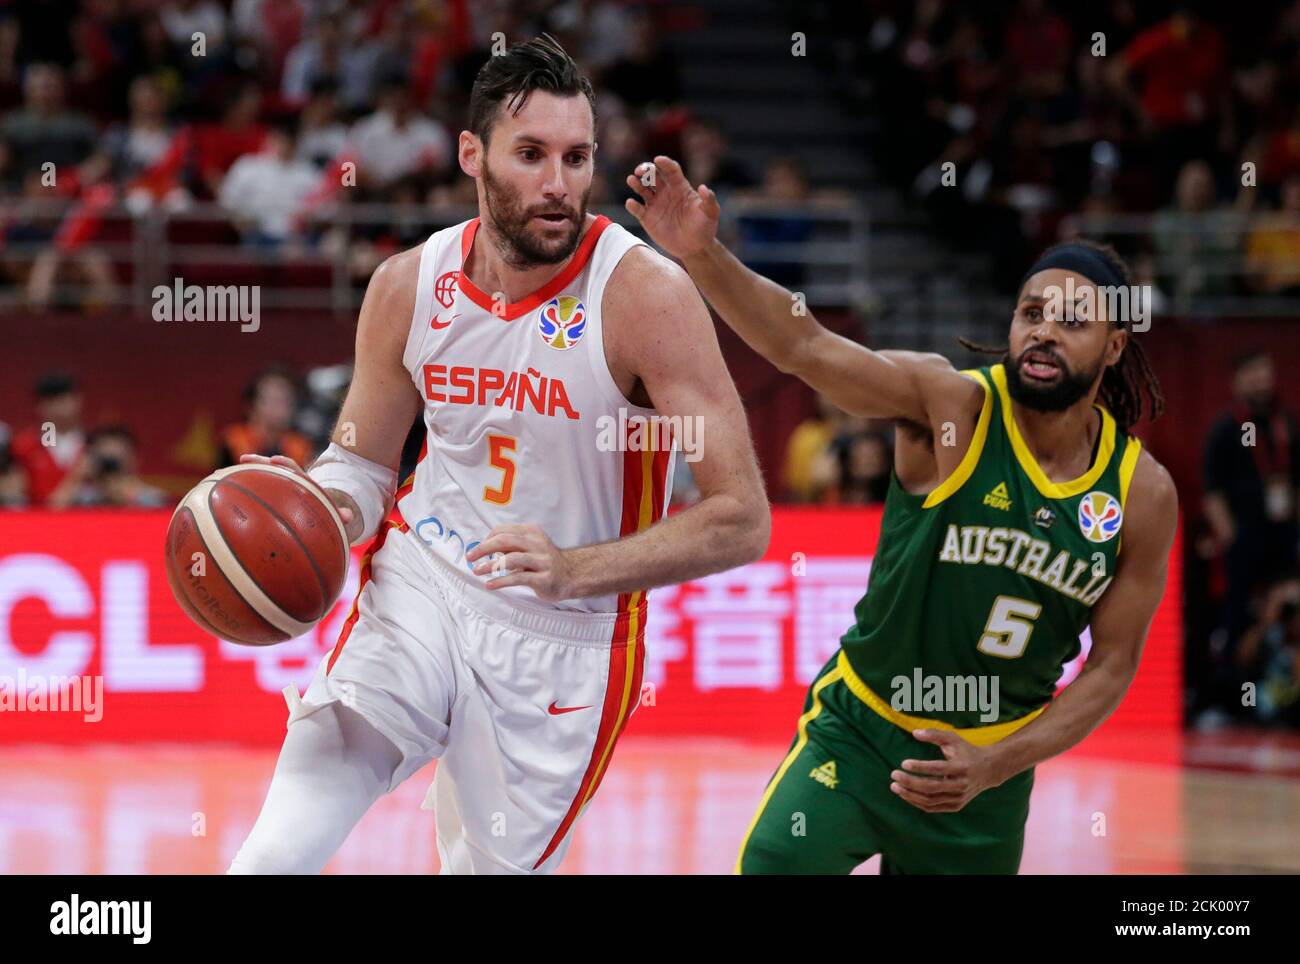 Basketball - FIBA World Cup - Semi Finals - Spain v Australia - Wukesong  Sport Arena, Beijing, China - September 13, 2019 Spain's Rudy Fernandez in  action with Australia's Patty Mills REUTERS/Jason Lee Stock Photo - Alamy